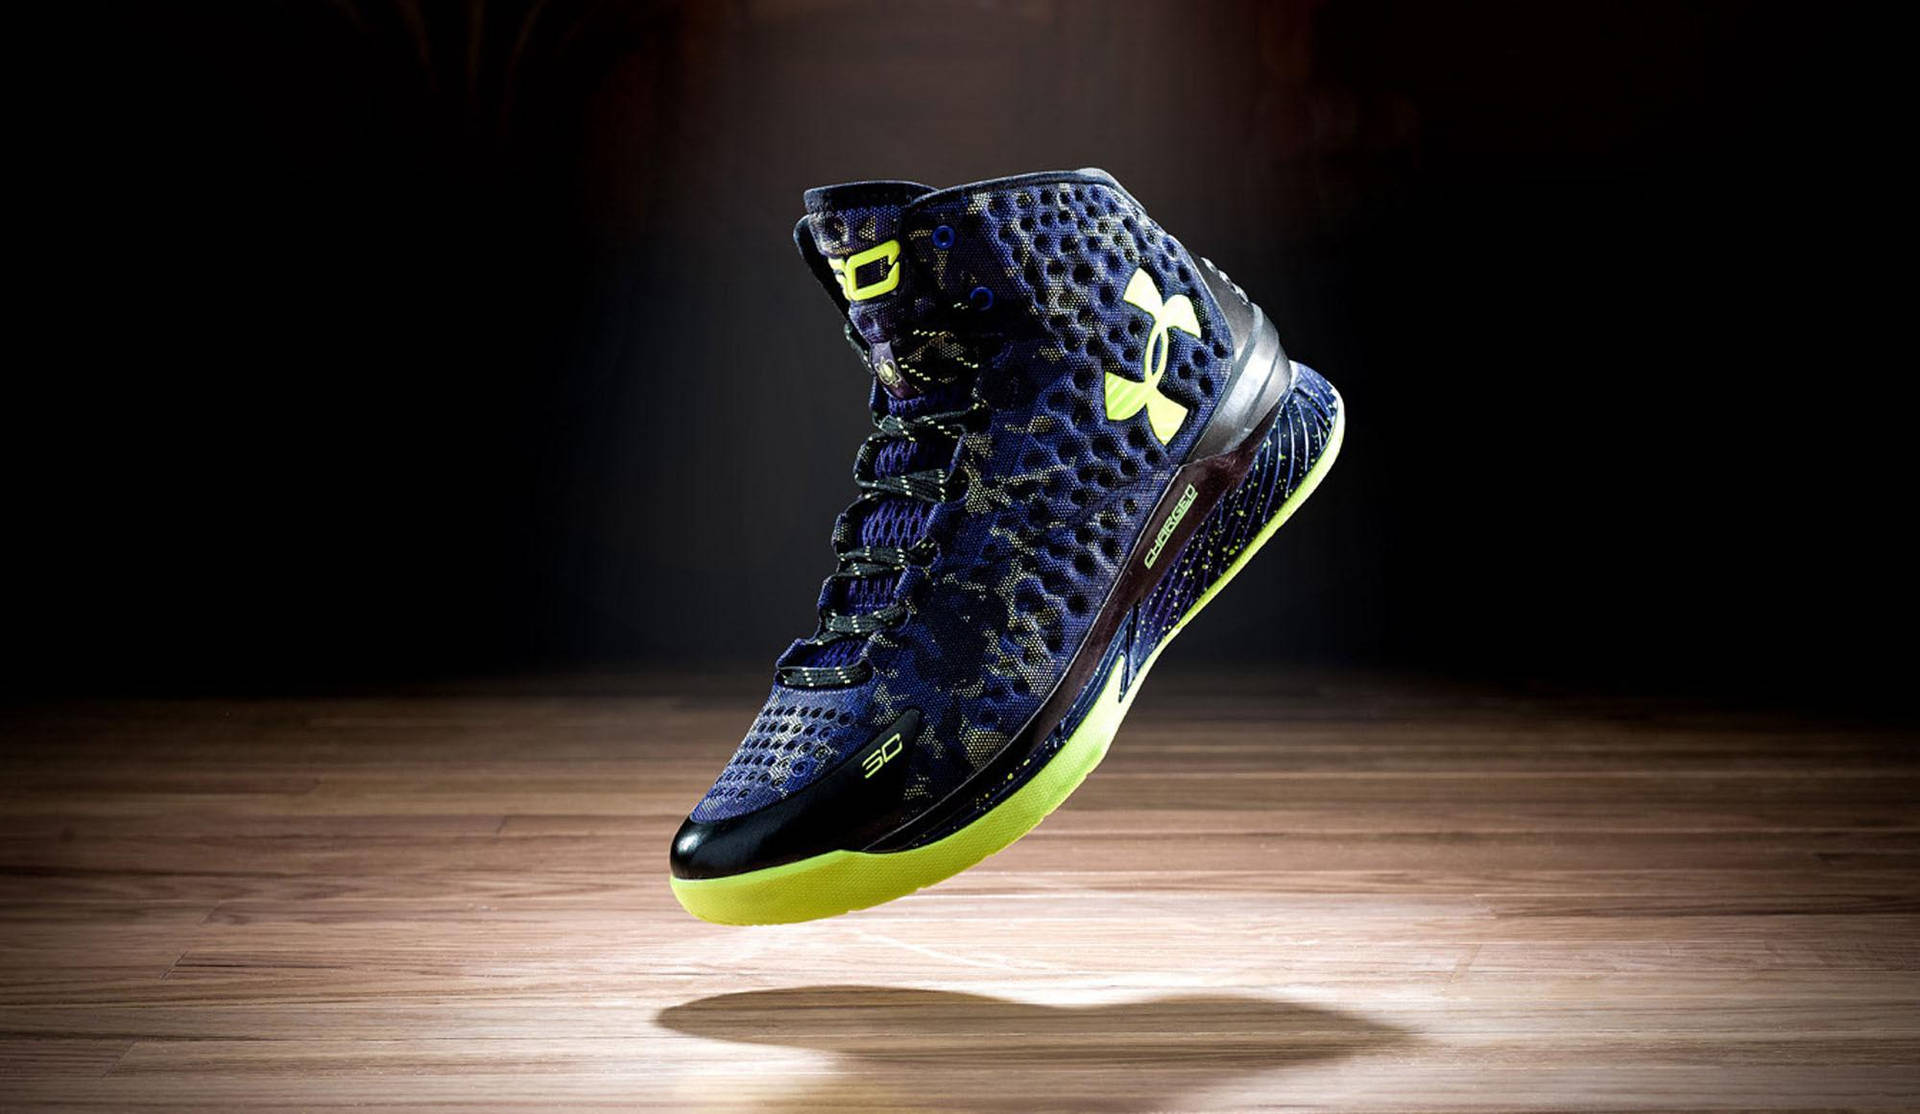 Under Armour Steph Curry Shoes Background